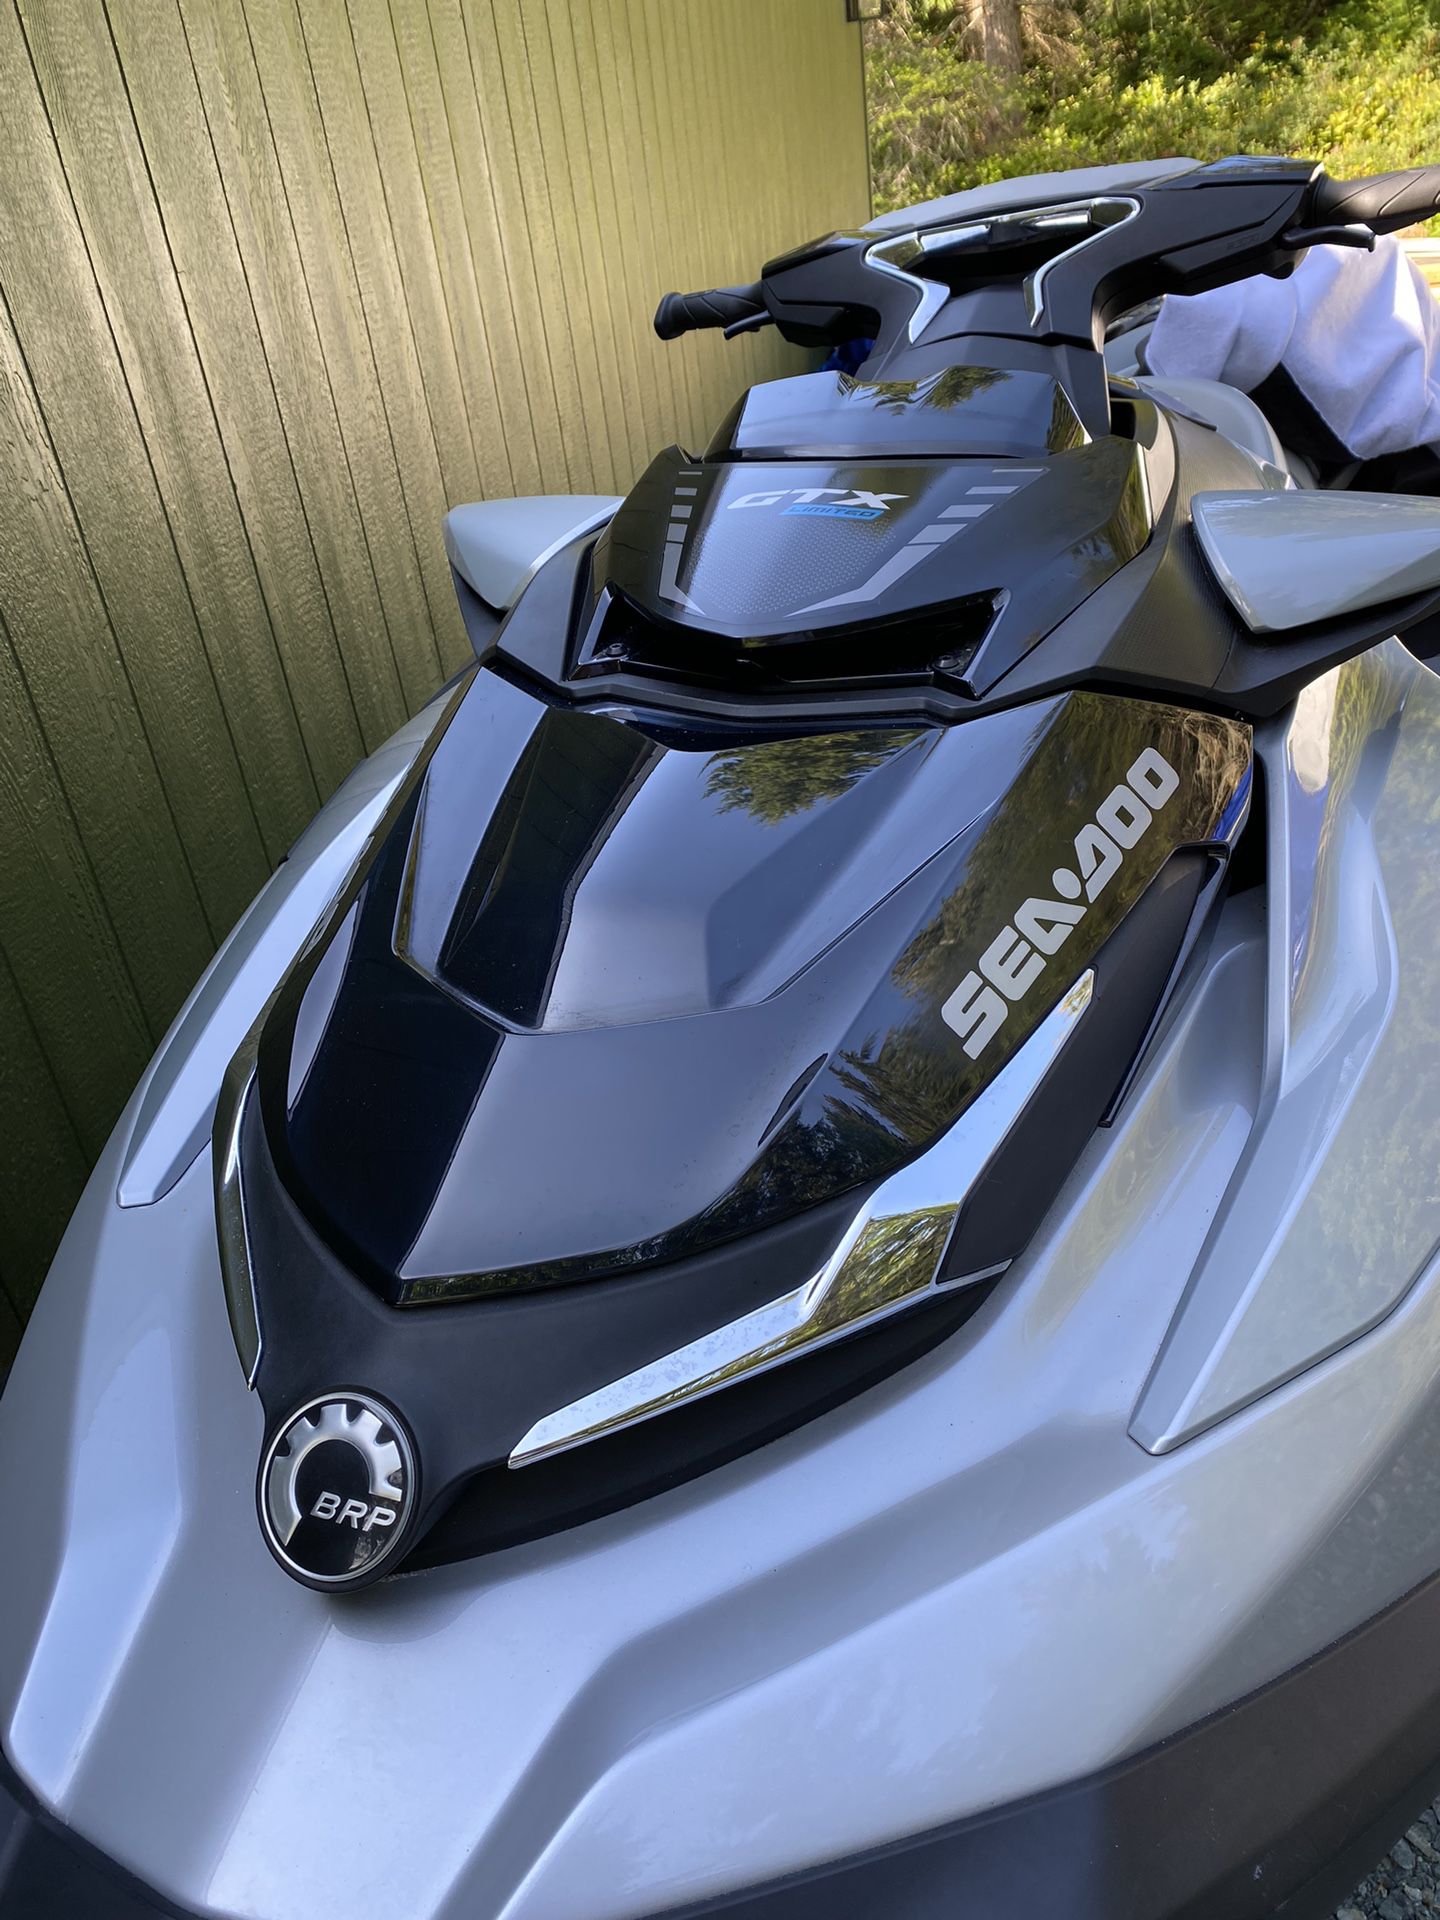 2020 Sea-doo GTX LTD 230 - Only 13 HRS - Dual Battery - all serivices kept up, its as new as preowned gets - PRICE REDUCED AND FIRM